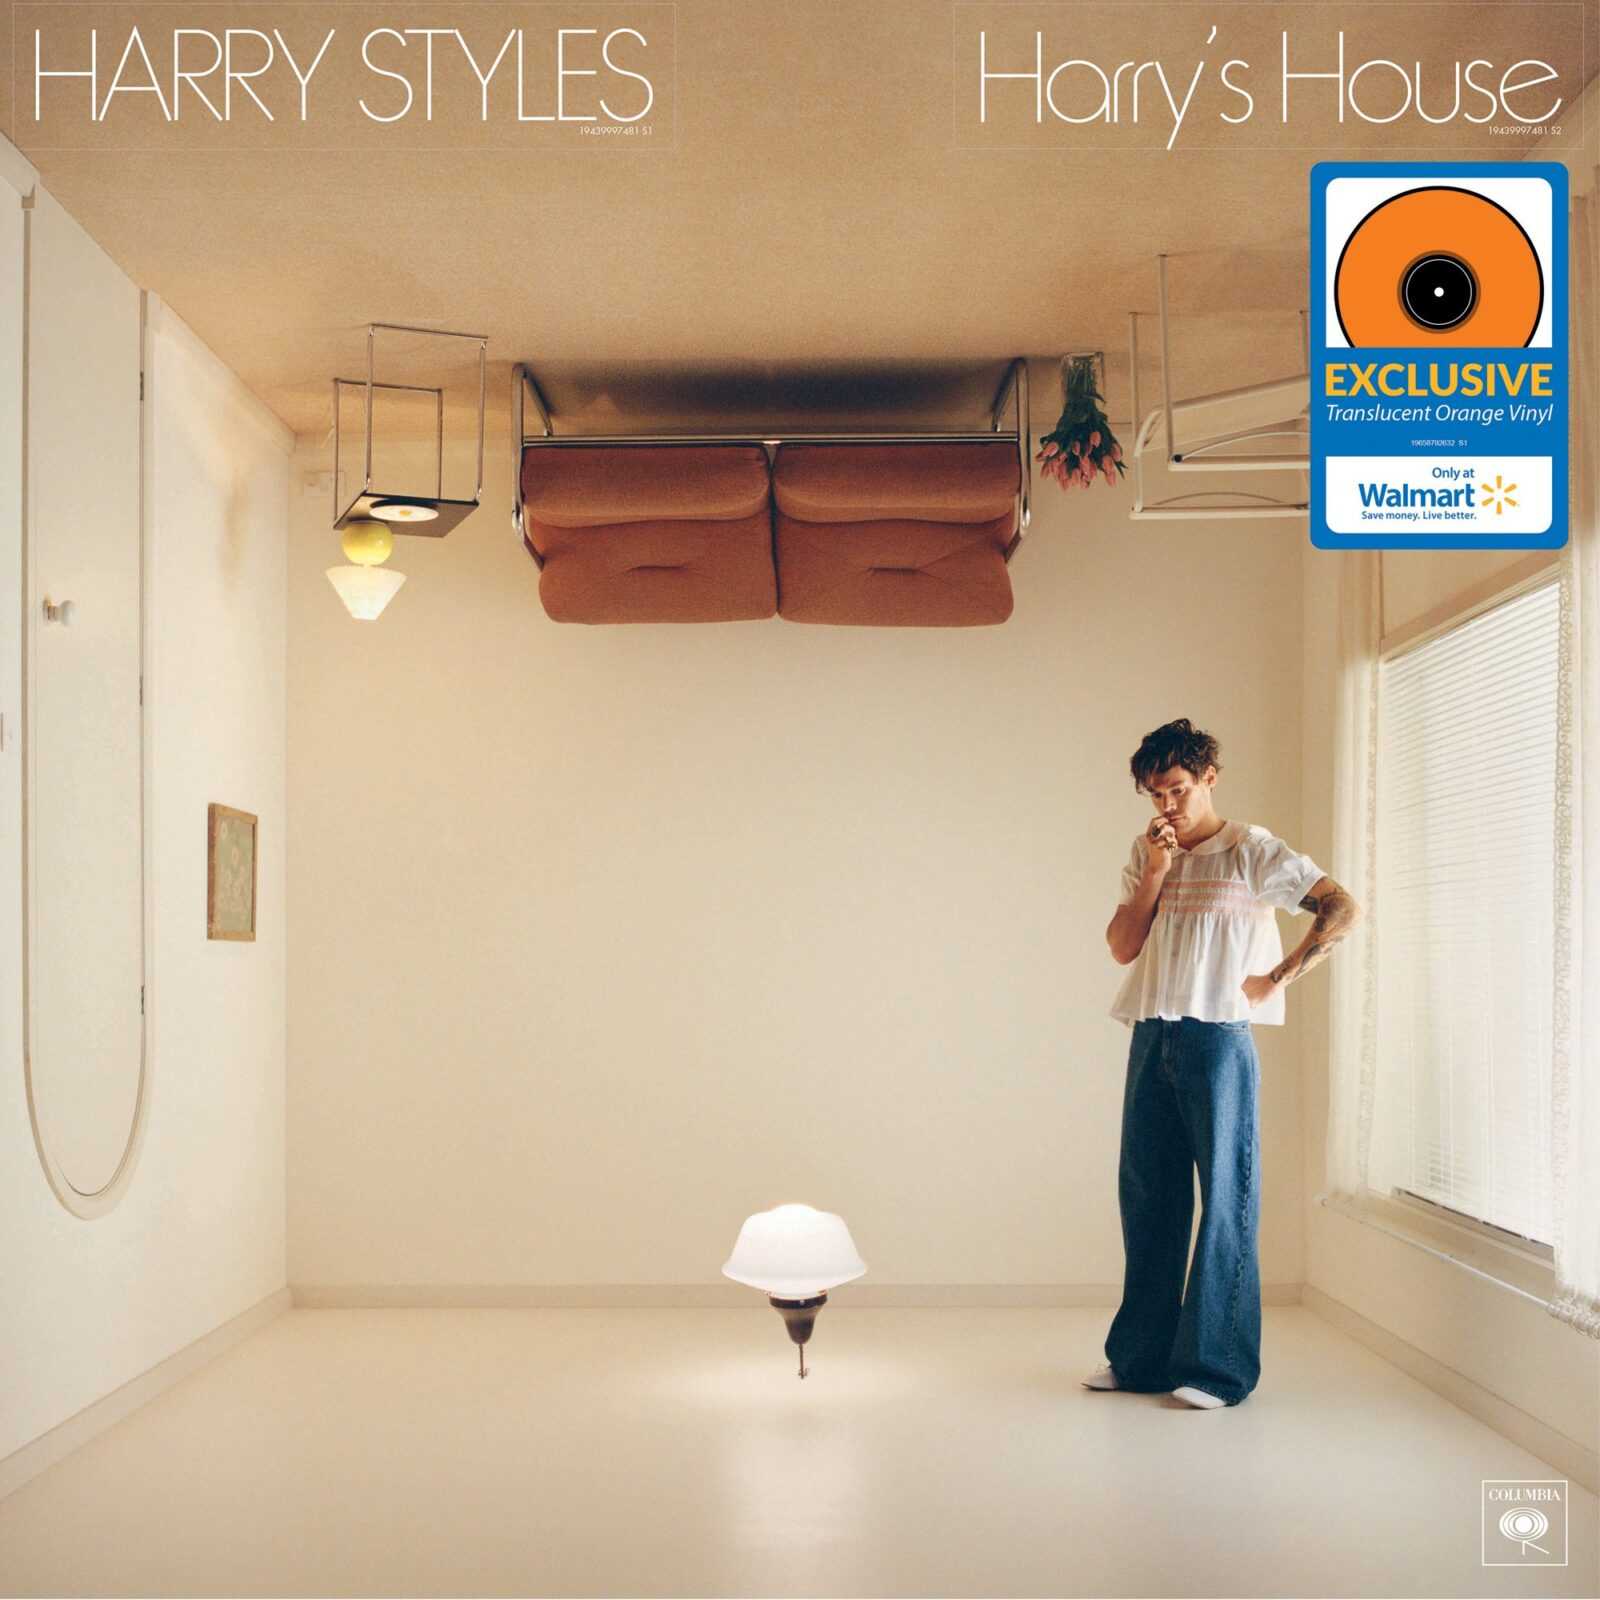  Harry's House: CDs y Vinilo